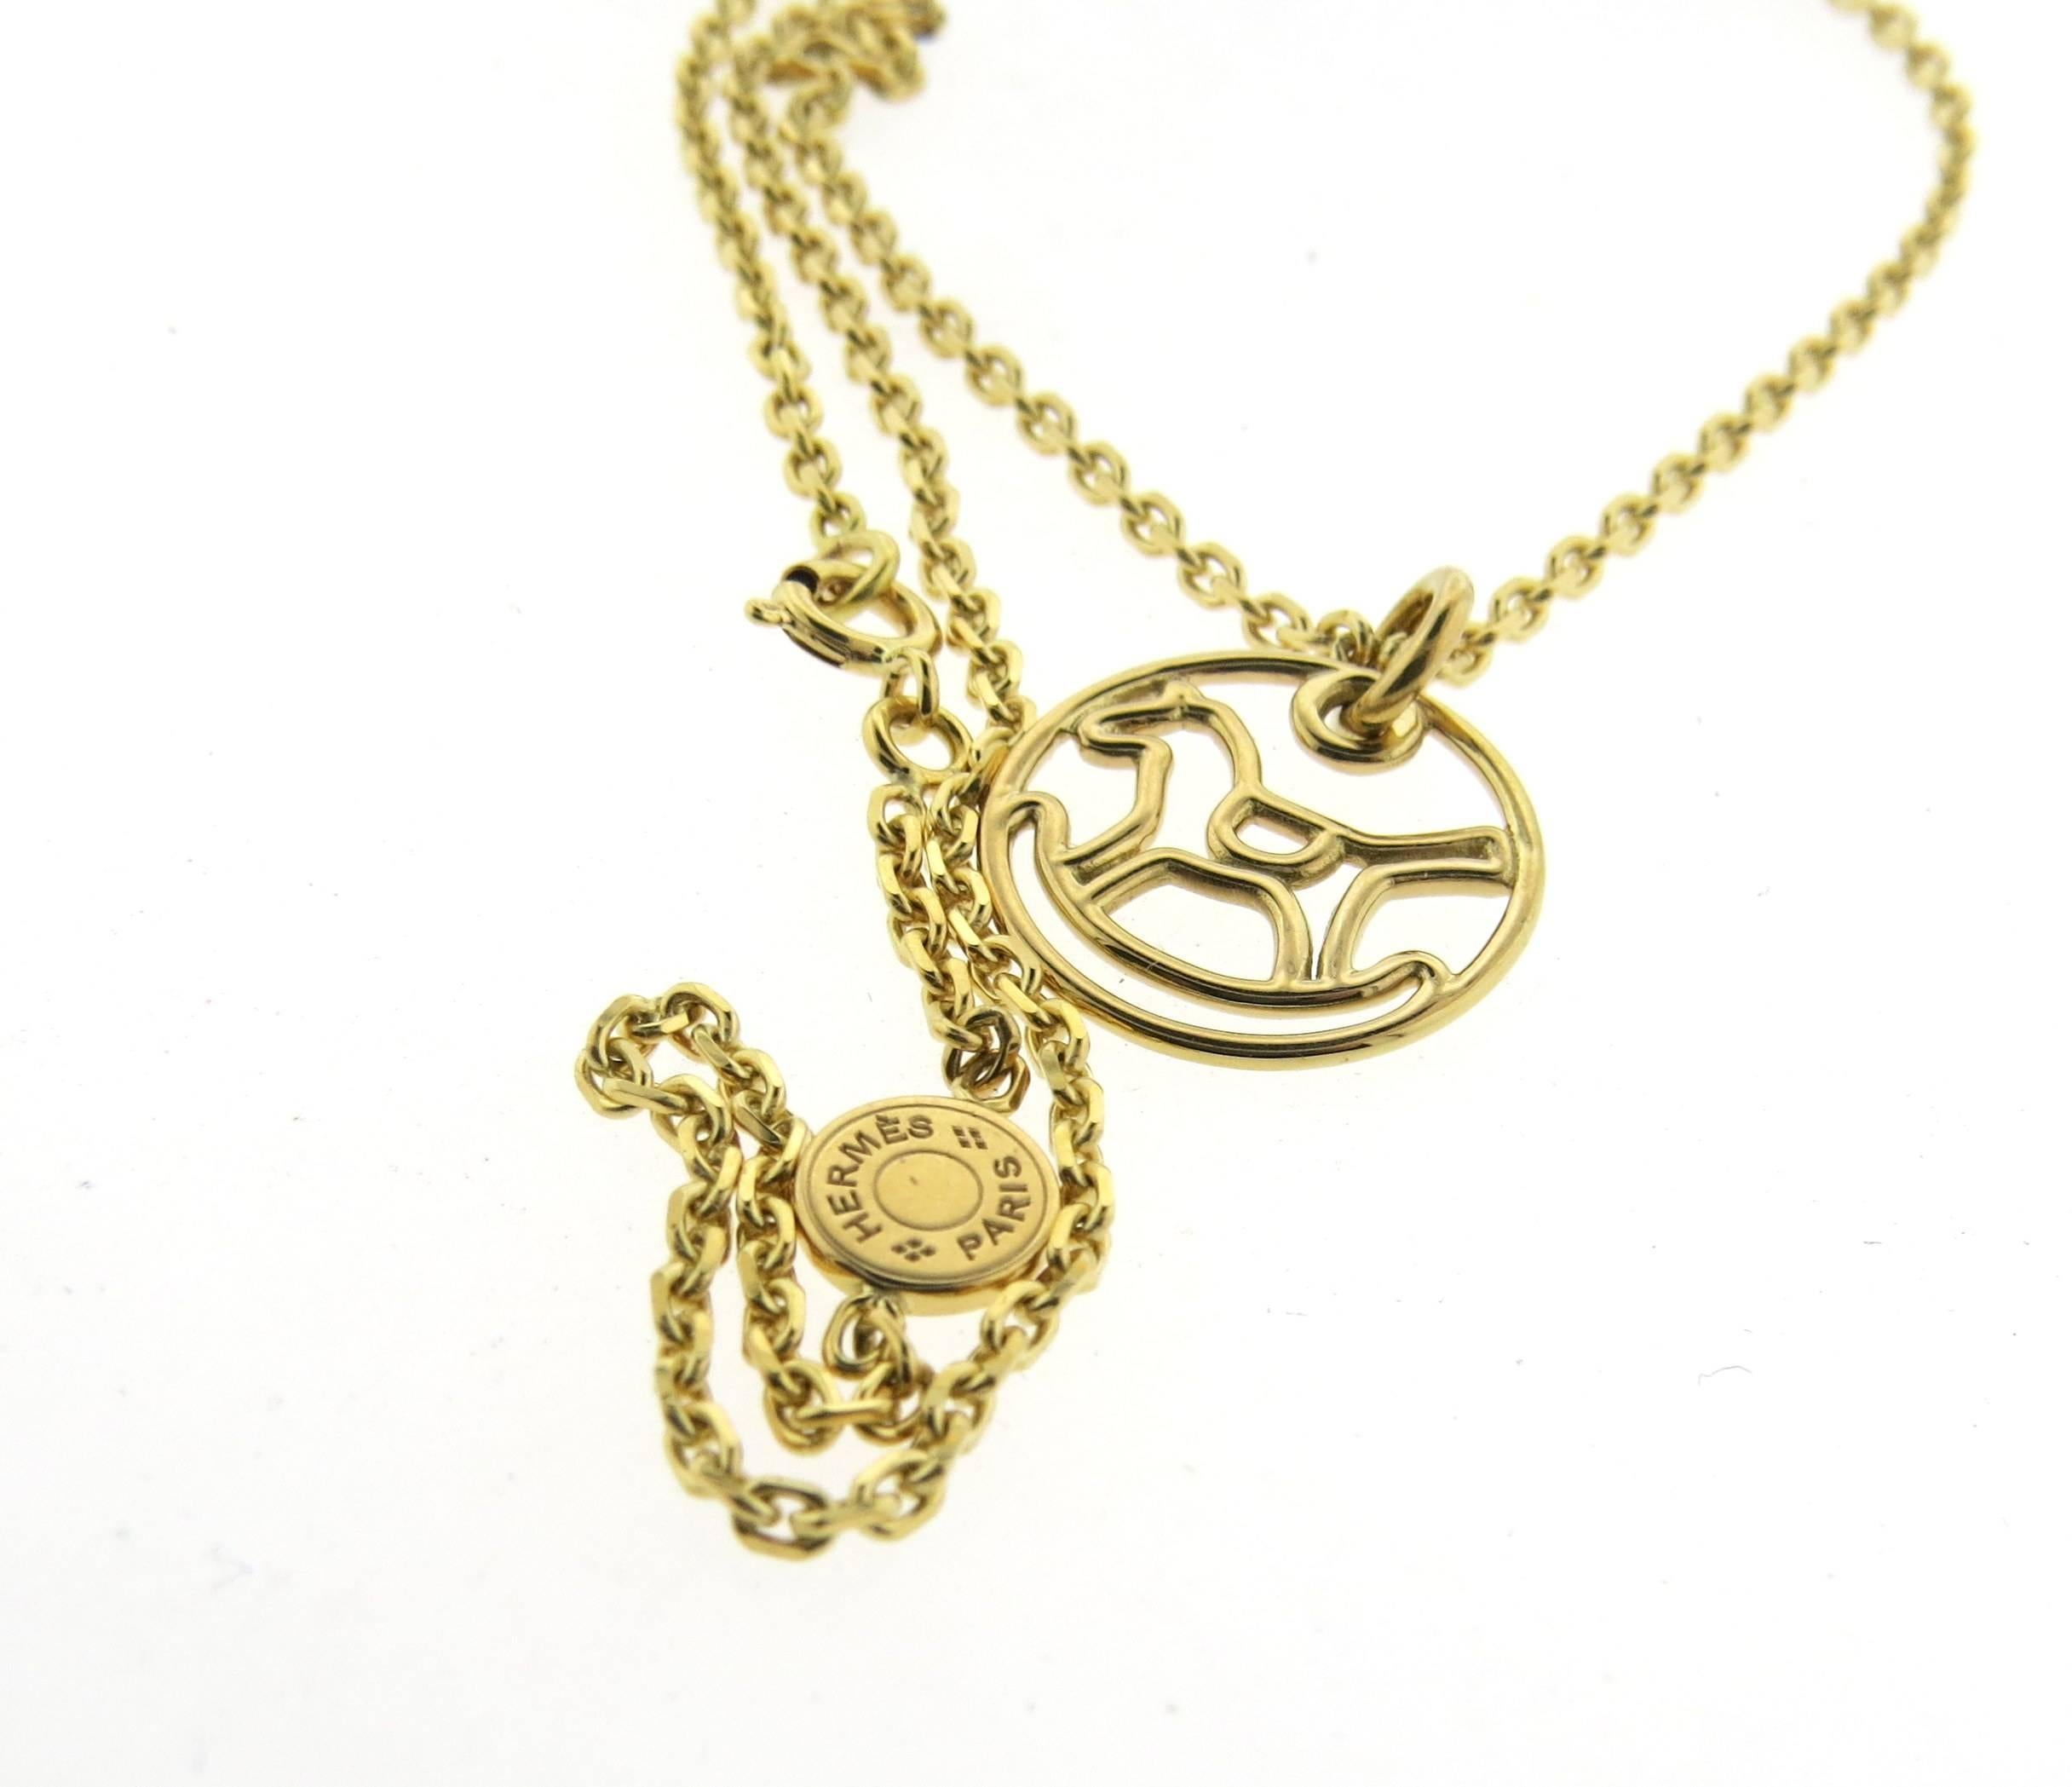 18k yellow gold necklace, featuring cute rocking horse circle pendant, crafted by Hermes. Necklace is 15 3/4" long, pendant is 17mm in diameter . Marked: Hermes, Paris, 750, 063291, au750, 0516747. Weight - 8.9 grams 